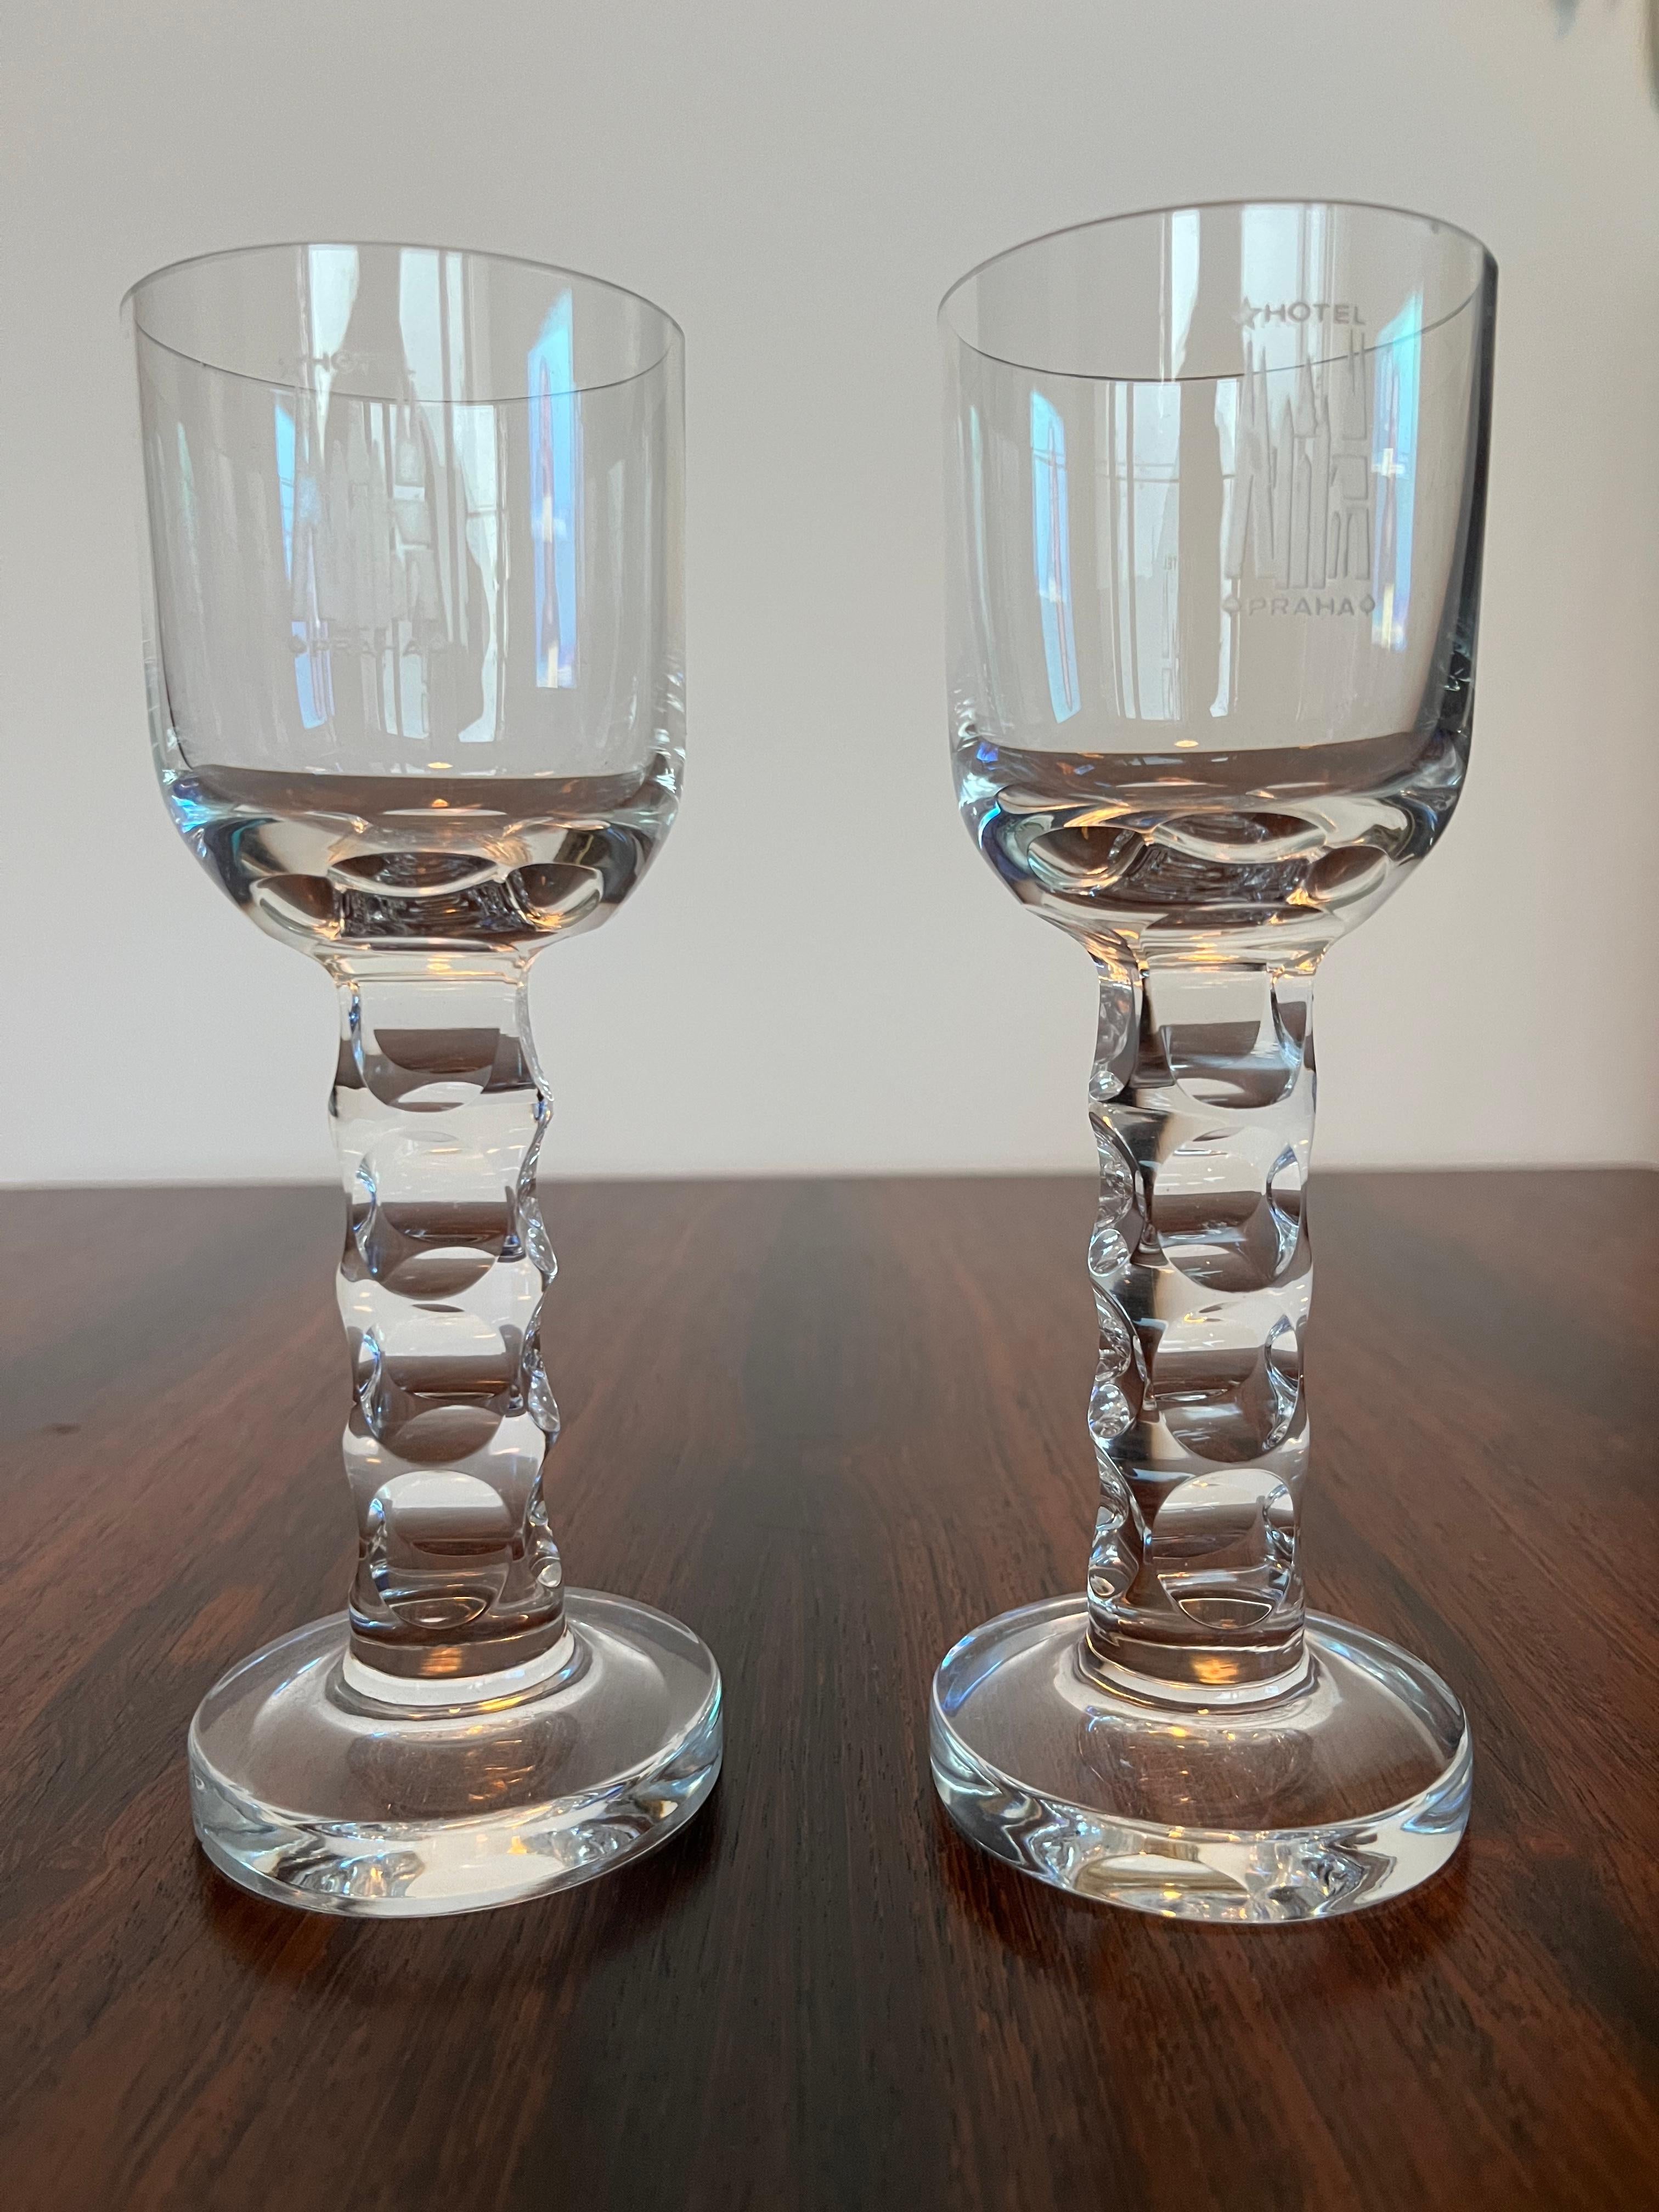 Unique Luxurious Set of 7 Design Glasses by Moser for Hotel Prag, 1970s In Good Condition For Sale In Praha, CZ